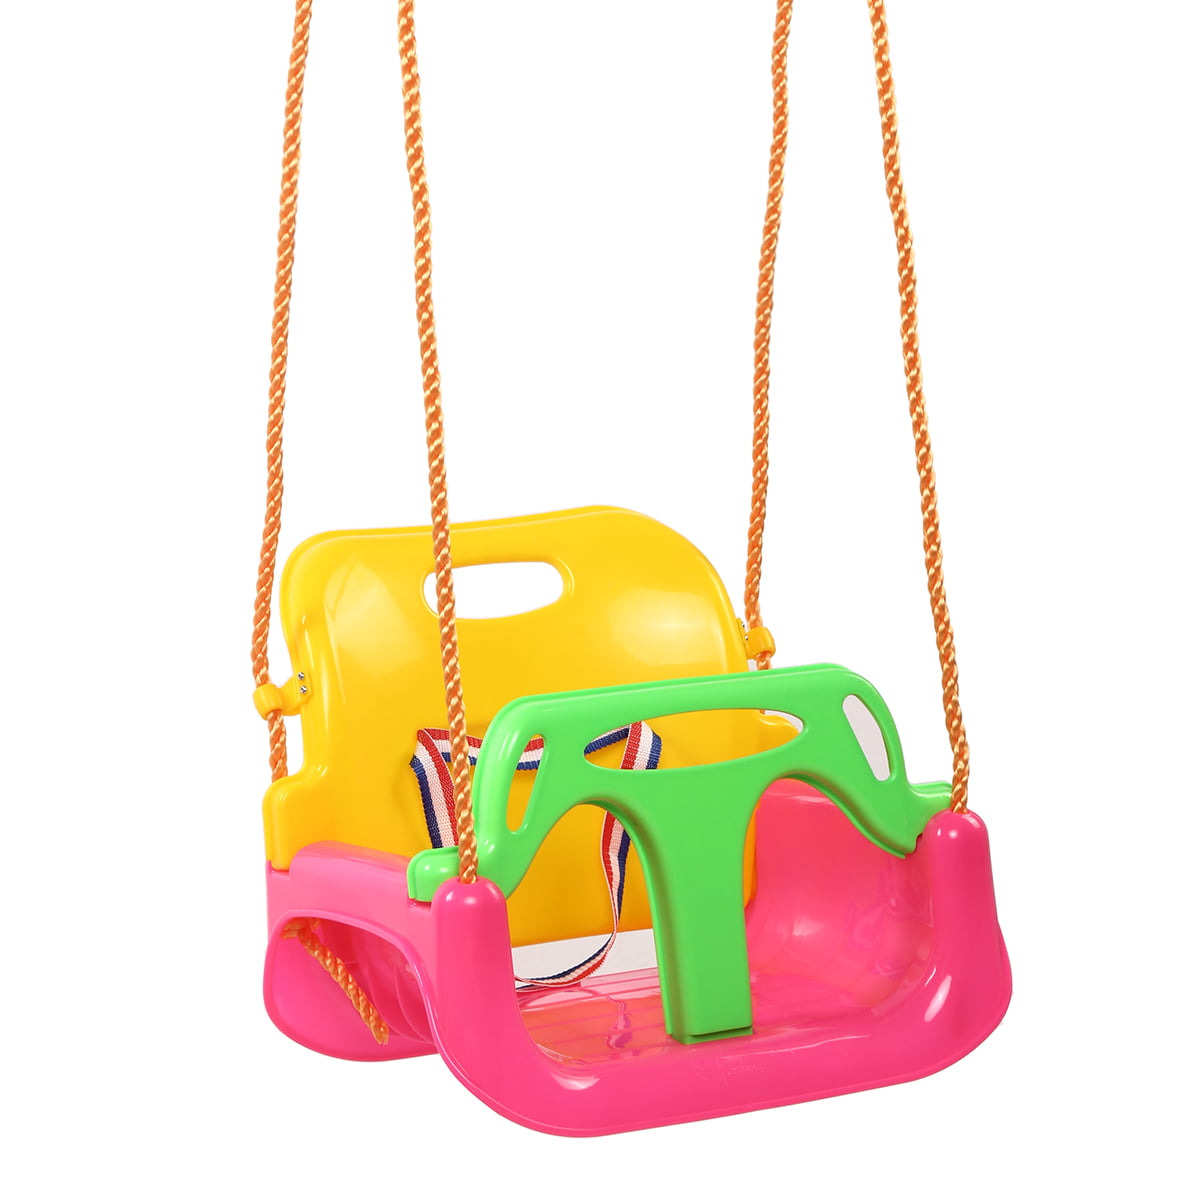 ANCHEER 3-in-1 Swing Seat for Kids 6 Months up Anti-Flip Snug & Detachable Kids 